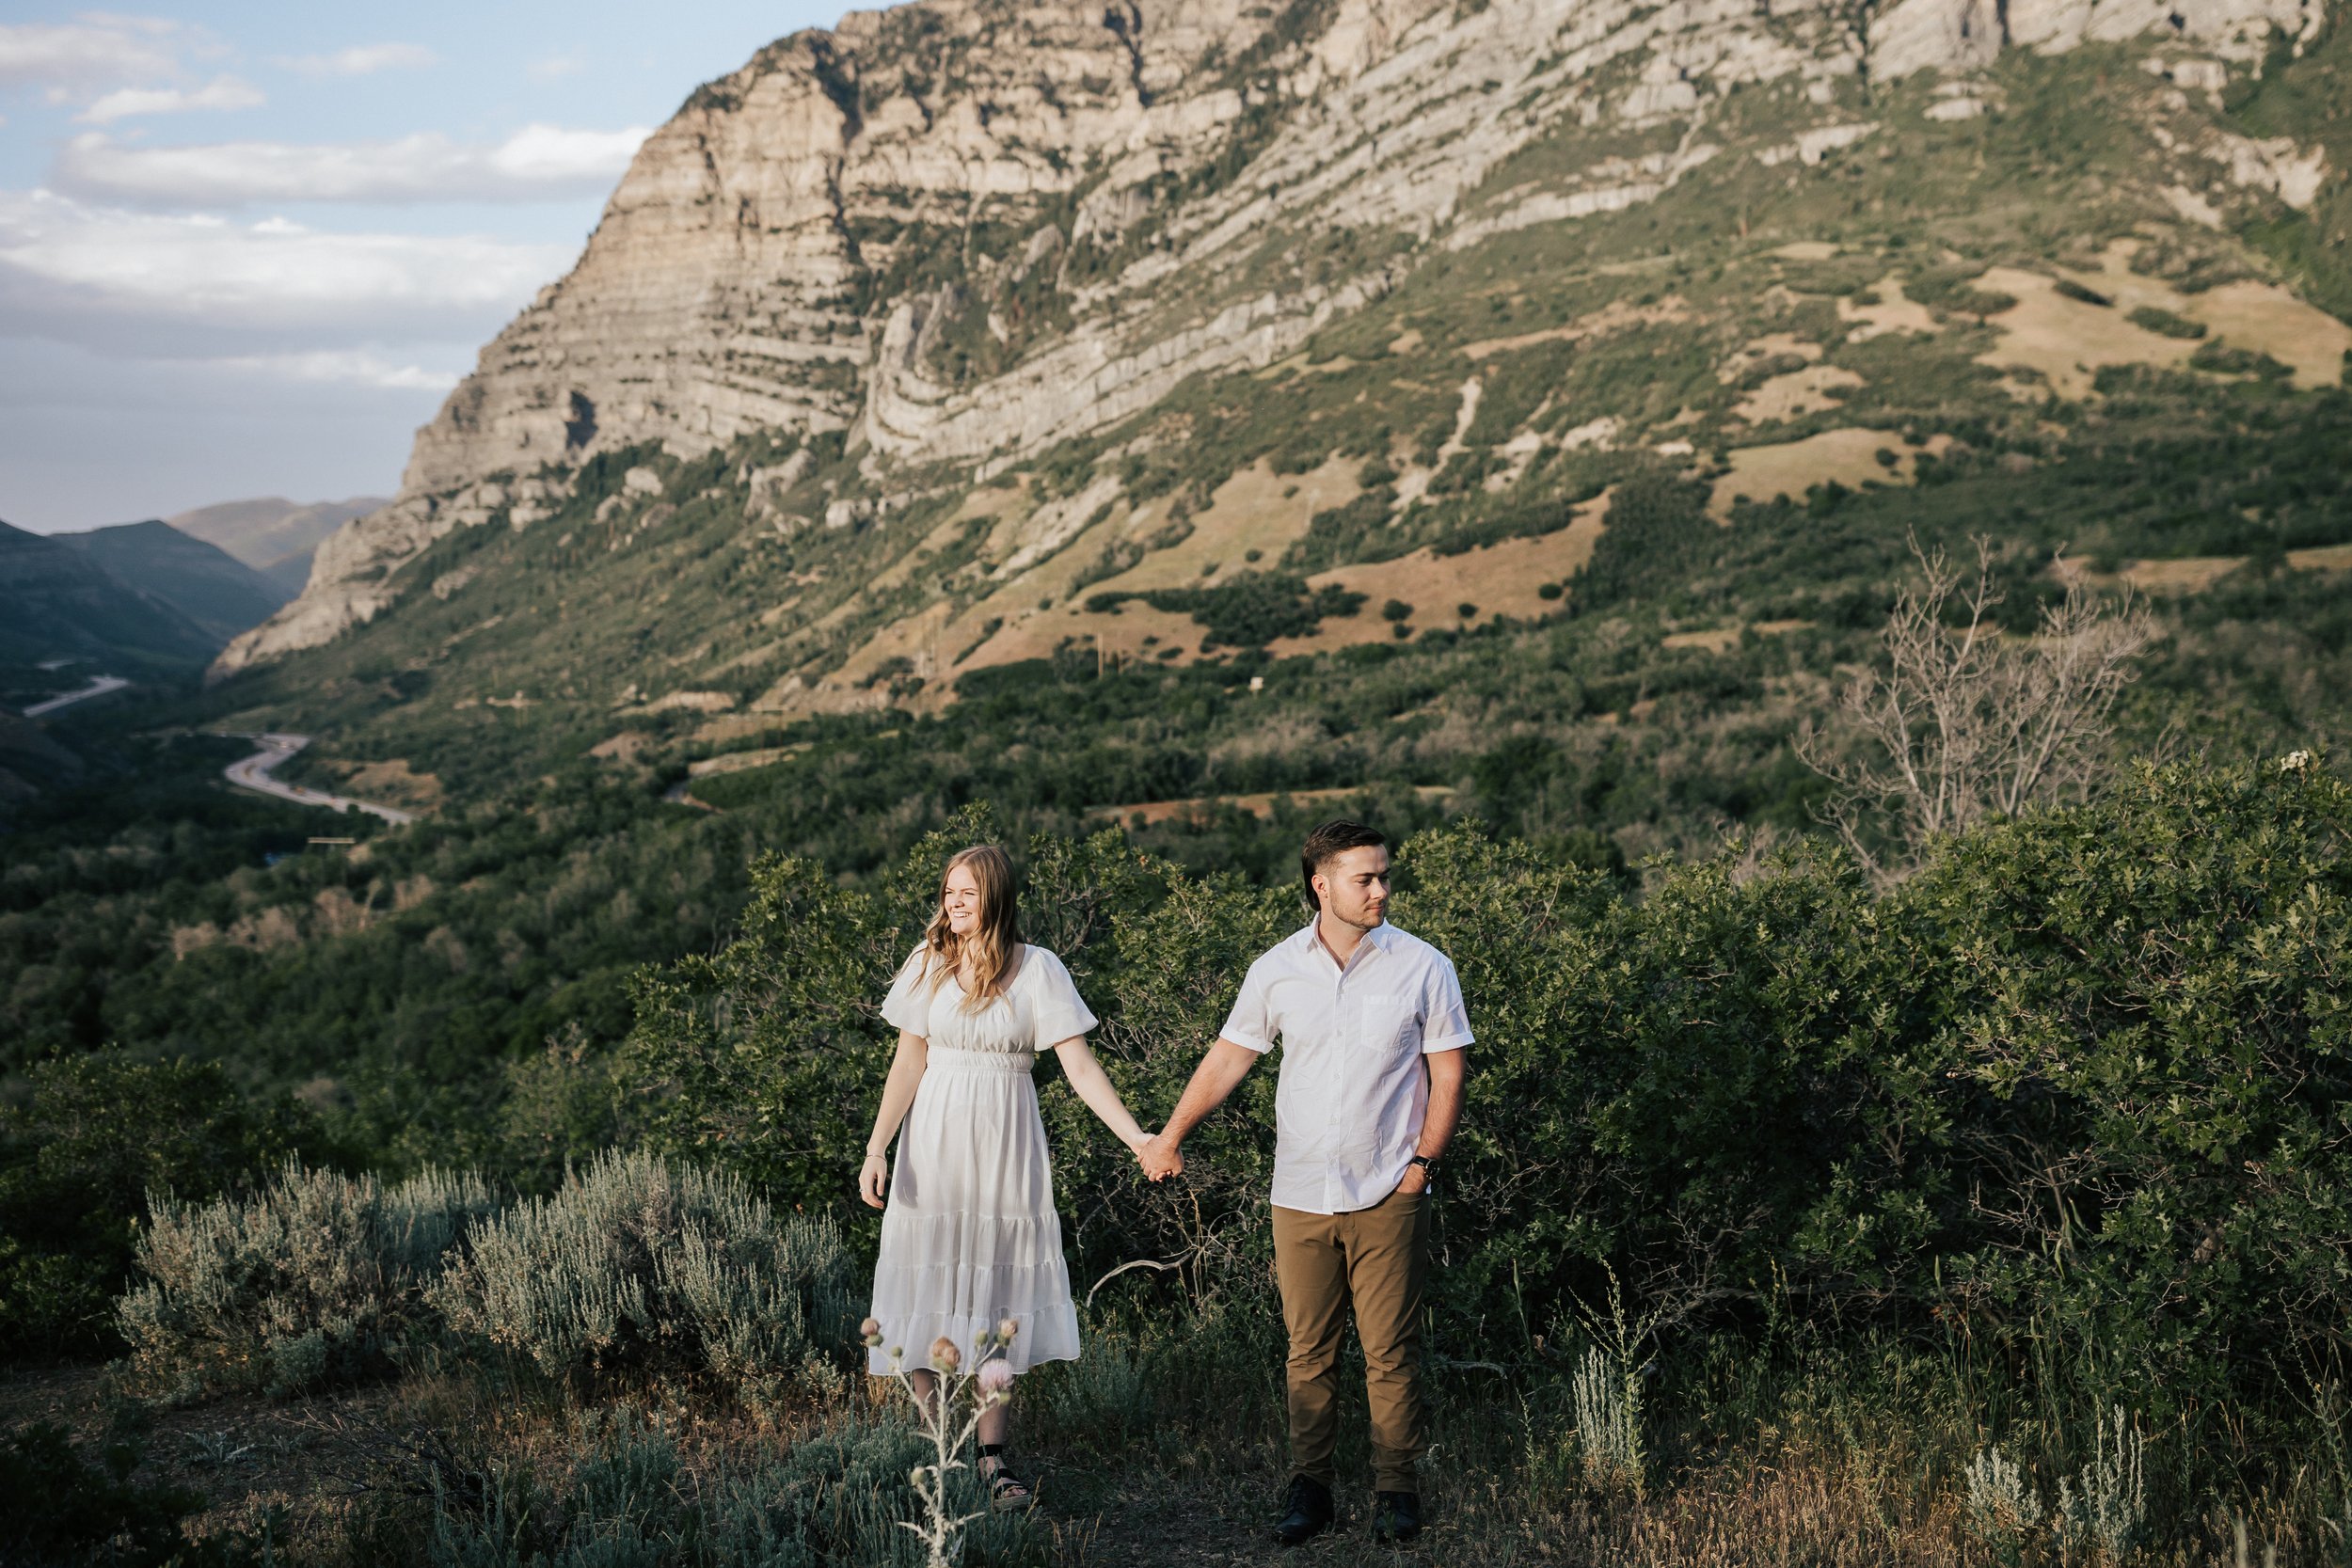  Summer anniversary couples session in the mountains. A young couple stands together in the mountains. Utah photographer. Engagement session. #utahphotographer #utahengagements  